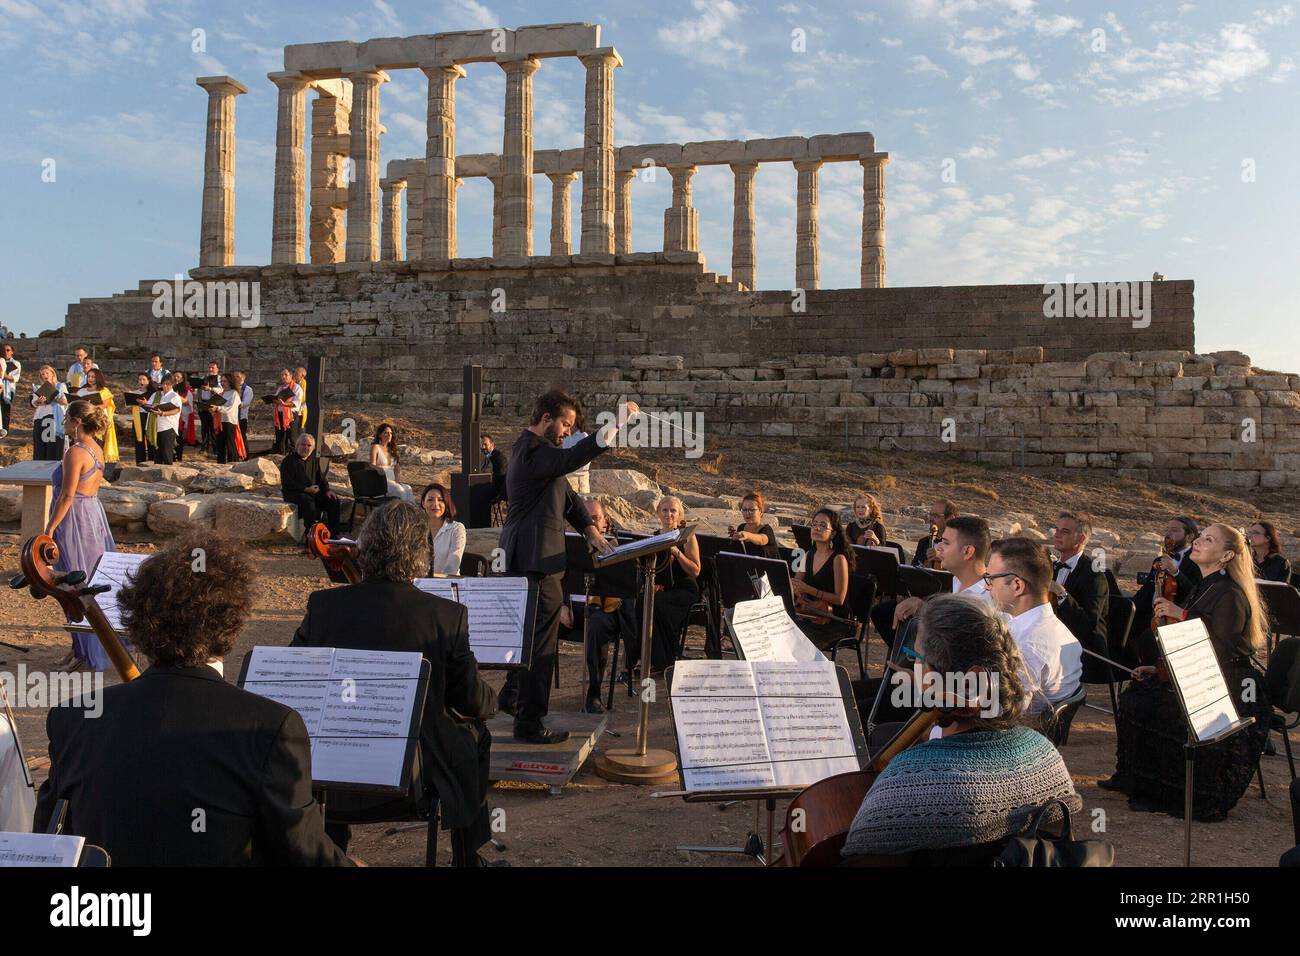 Bilder des Jahres 2020, Entertainment 09 September Entertainment Themen der Woche KW38 Entertainment Bilder des Tages 200917 -- ATHENS, Sept. 17, 2020 -- Musicians perform a musical in front of the ruins of the Temple of Poseidon at cape Sounion, some 70 km southeast of Athens, Greece, on Sept. 17, 2020. On the occasion of the 70th anniversary of the establishment of the Greek National Tourism Organization GNTO and the 71st anniversary of the founding of the People s Republic of China and the Mid-Autumn festival, a musical entitled As long as there shall be Achaeans -- Variations on a Sunbeam Stock Photo